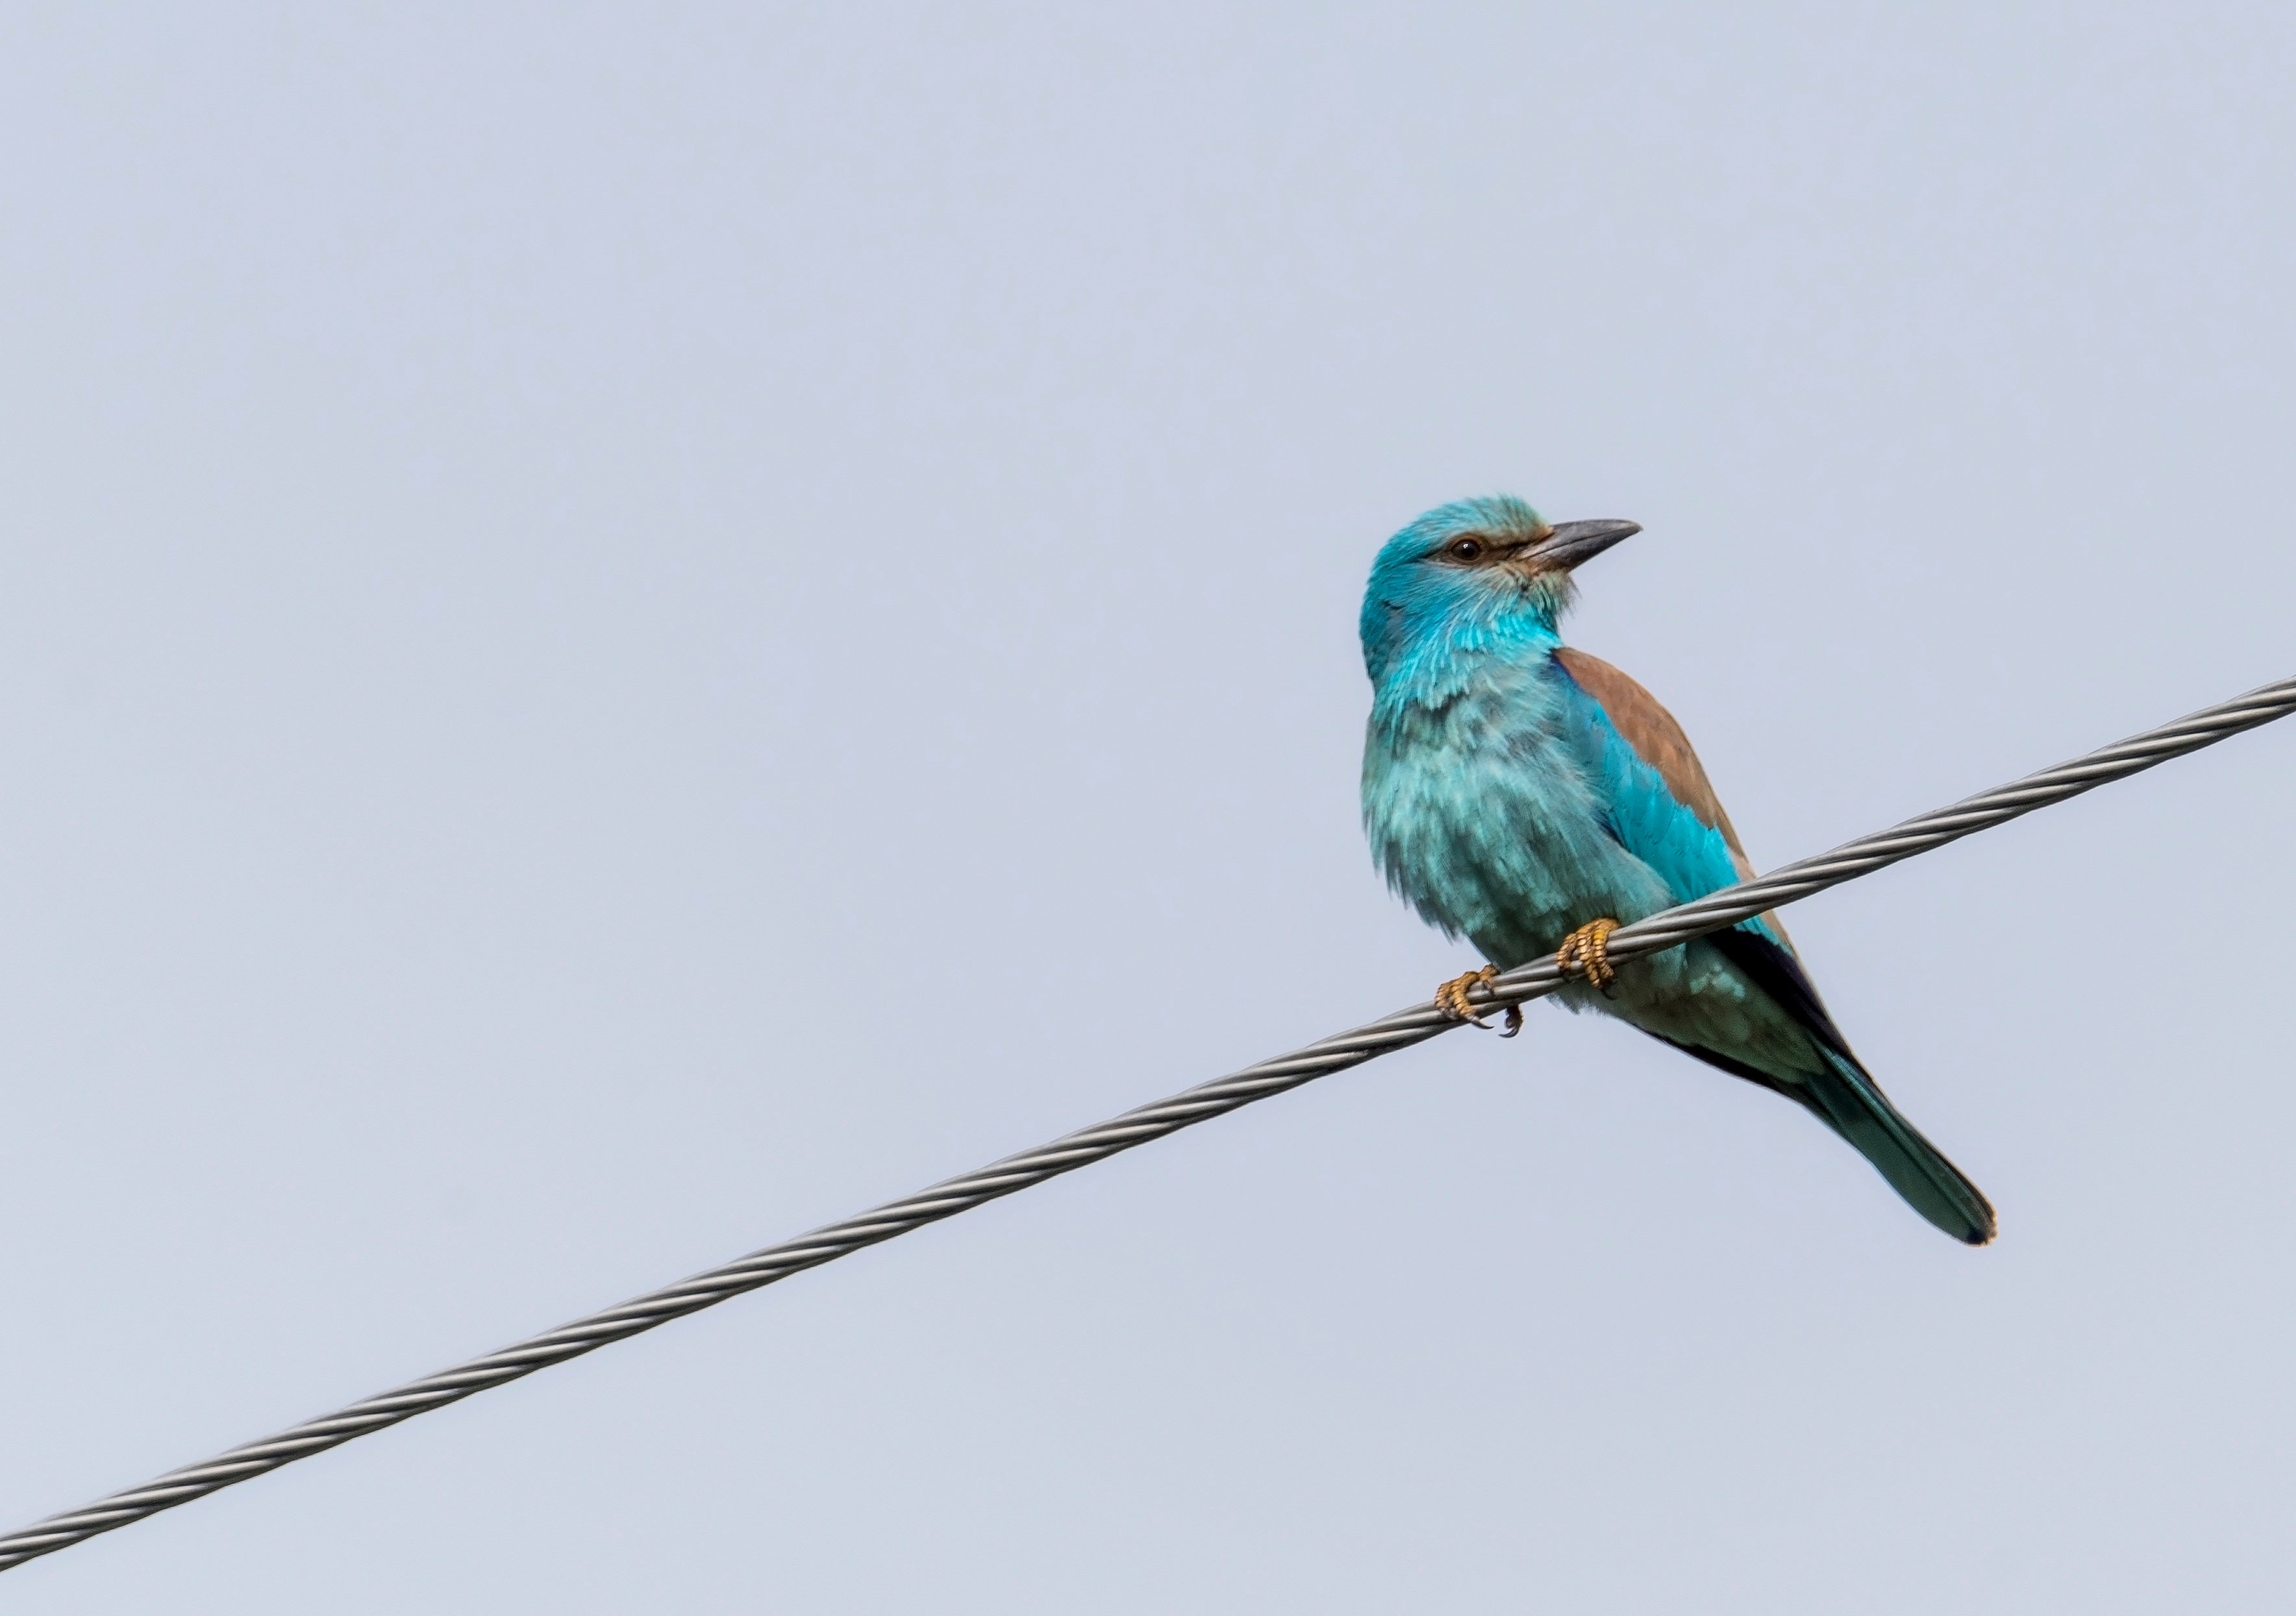 Majestic European Roller bird perched on a branch, showcasing vibrant blue feathers under the clear sky in a high-resolution desktop background.